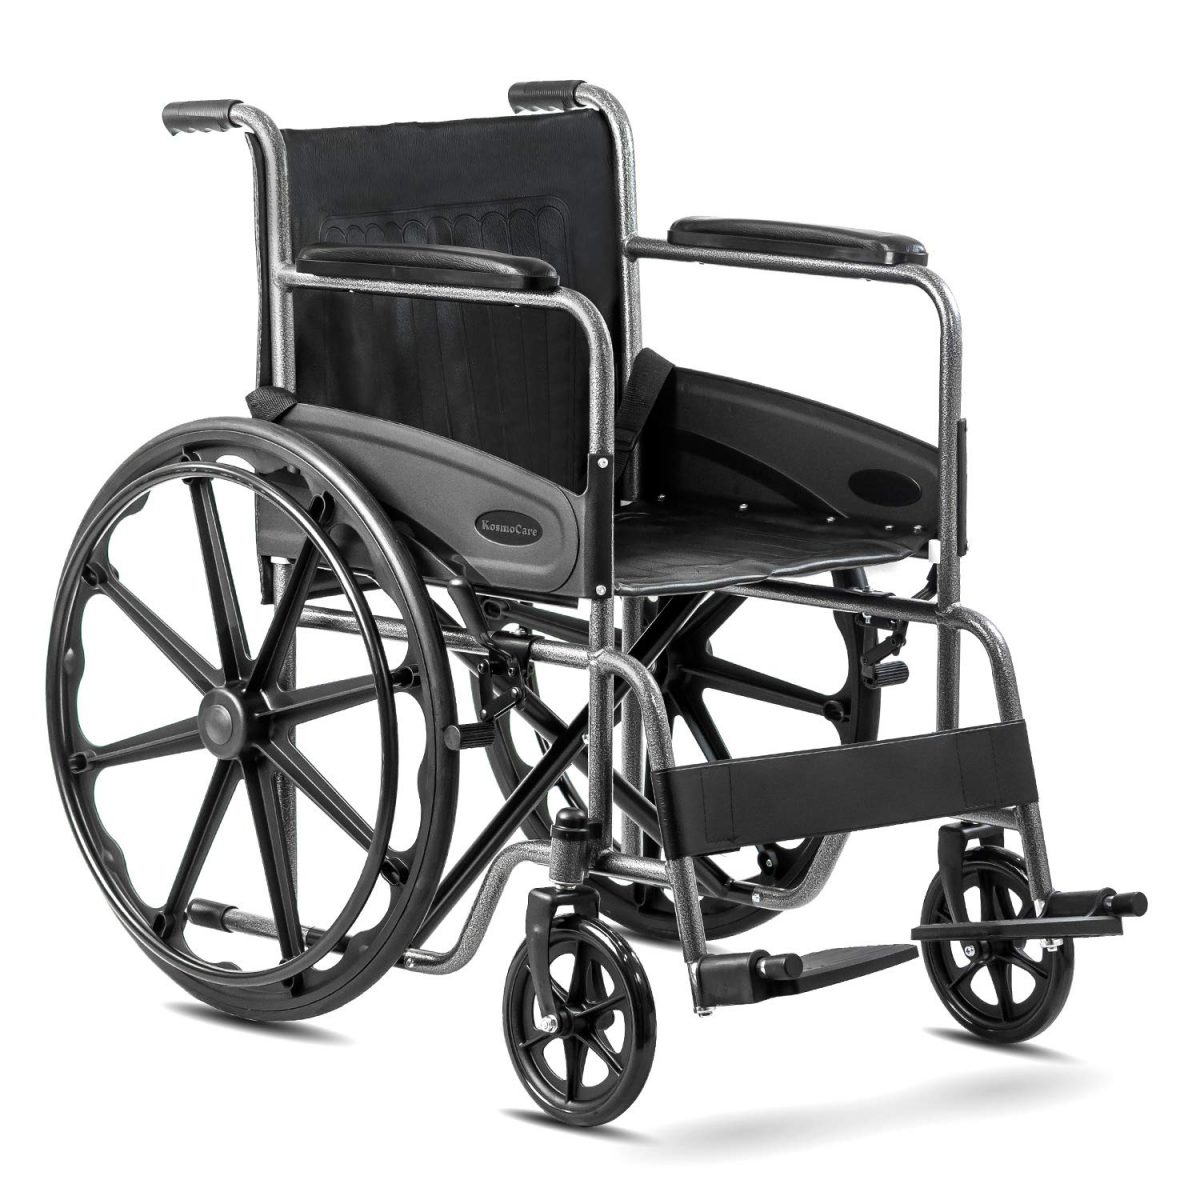 Wheelchair Market Analysis, Growth by Top Companies, Technology and End User, Forecast to 2032